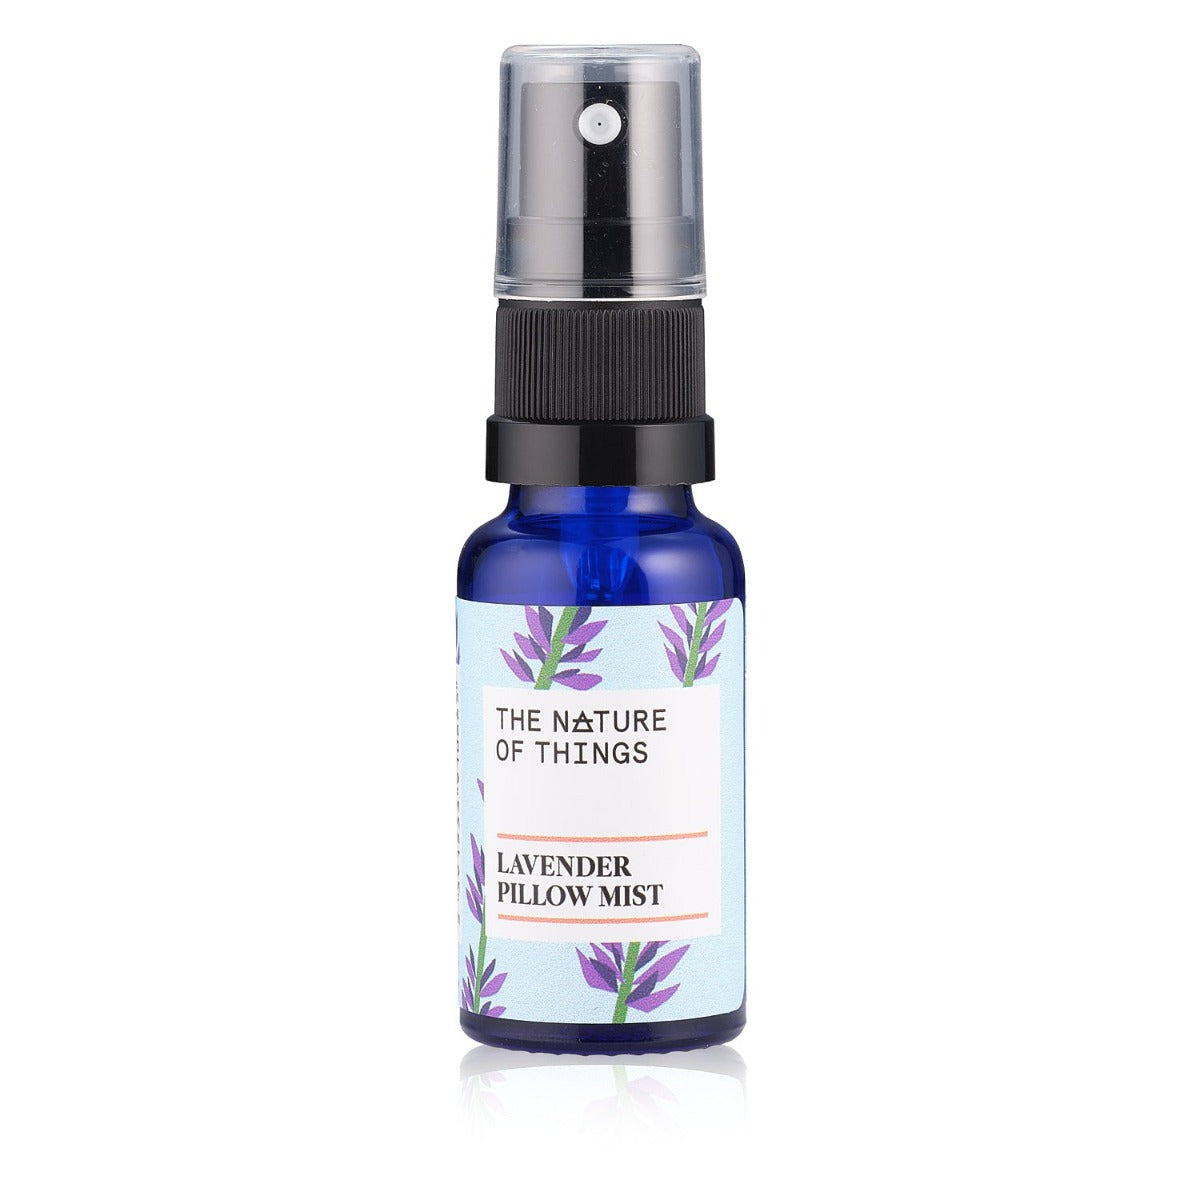 Lavender Pillow Mist from The Nature of Things